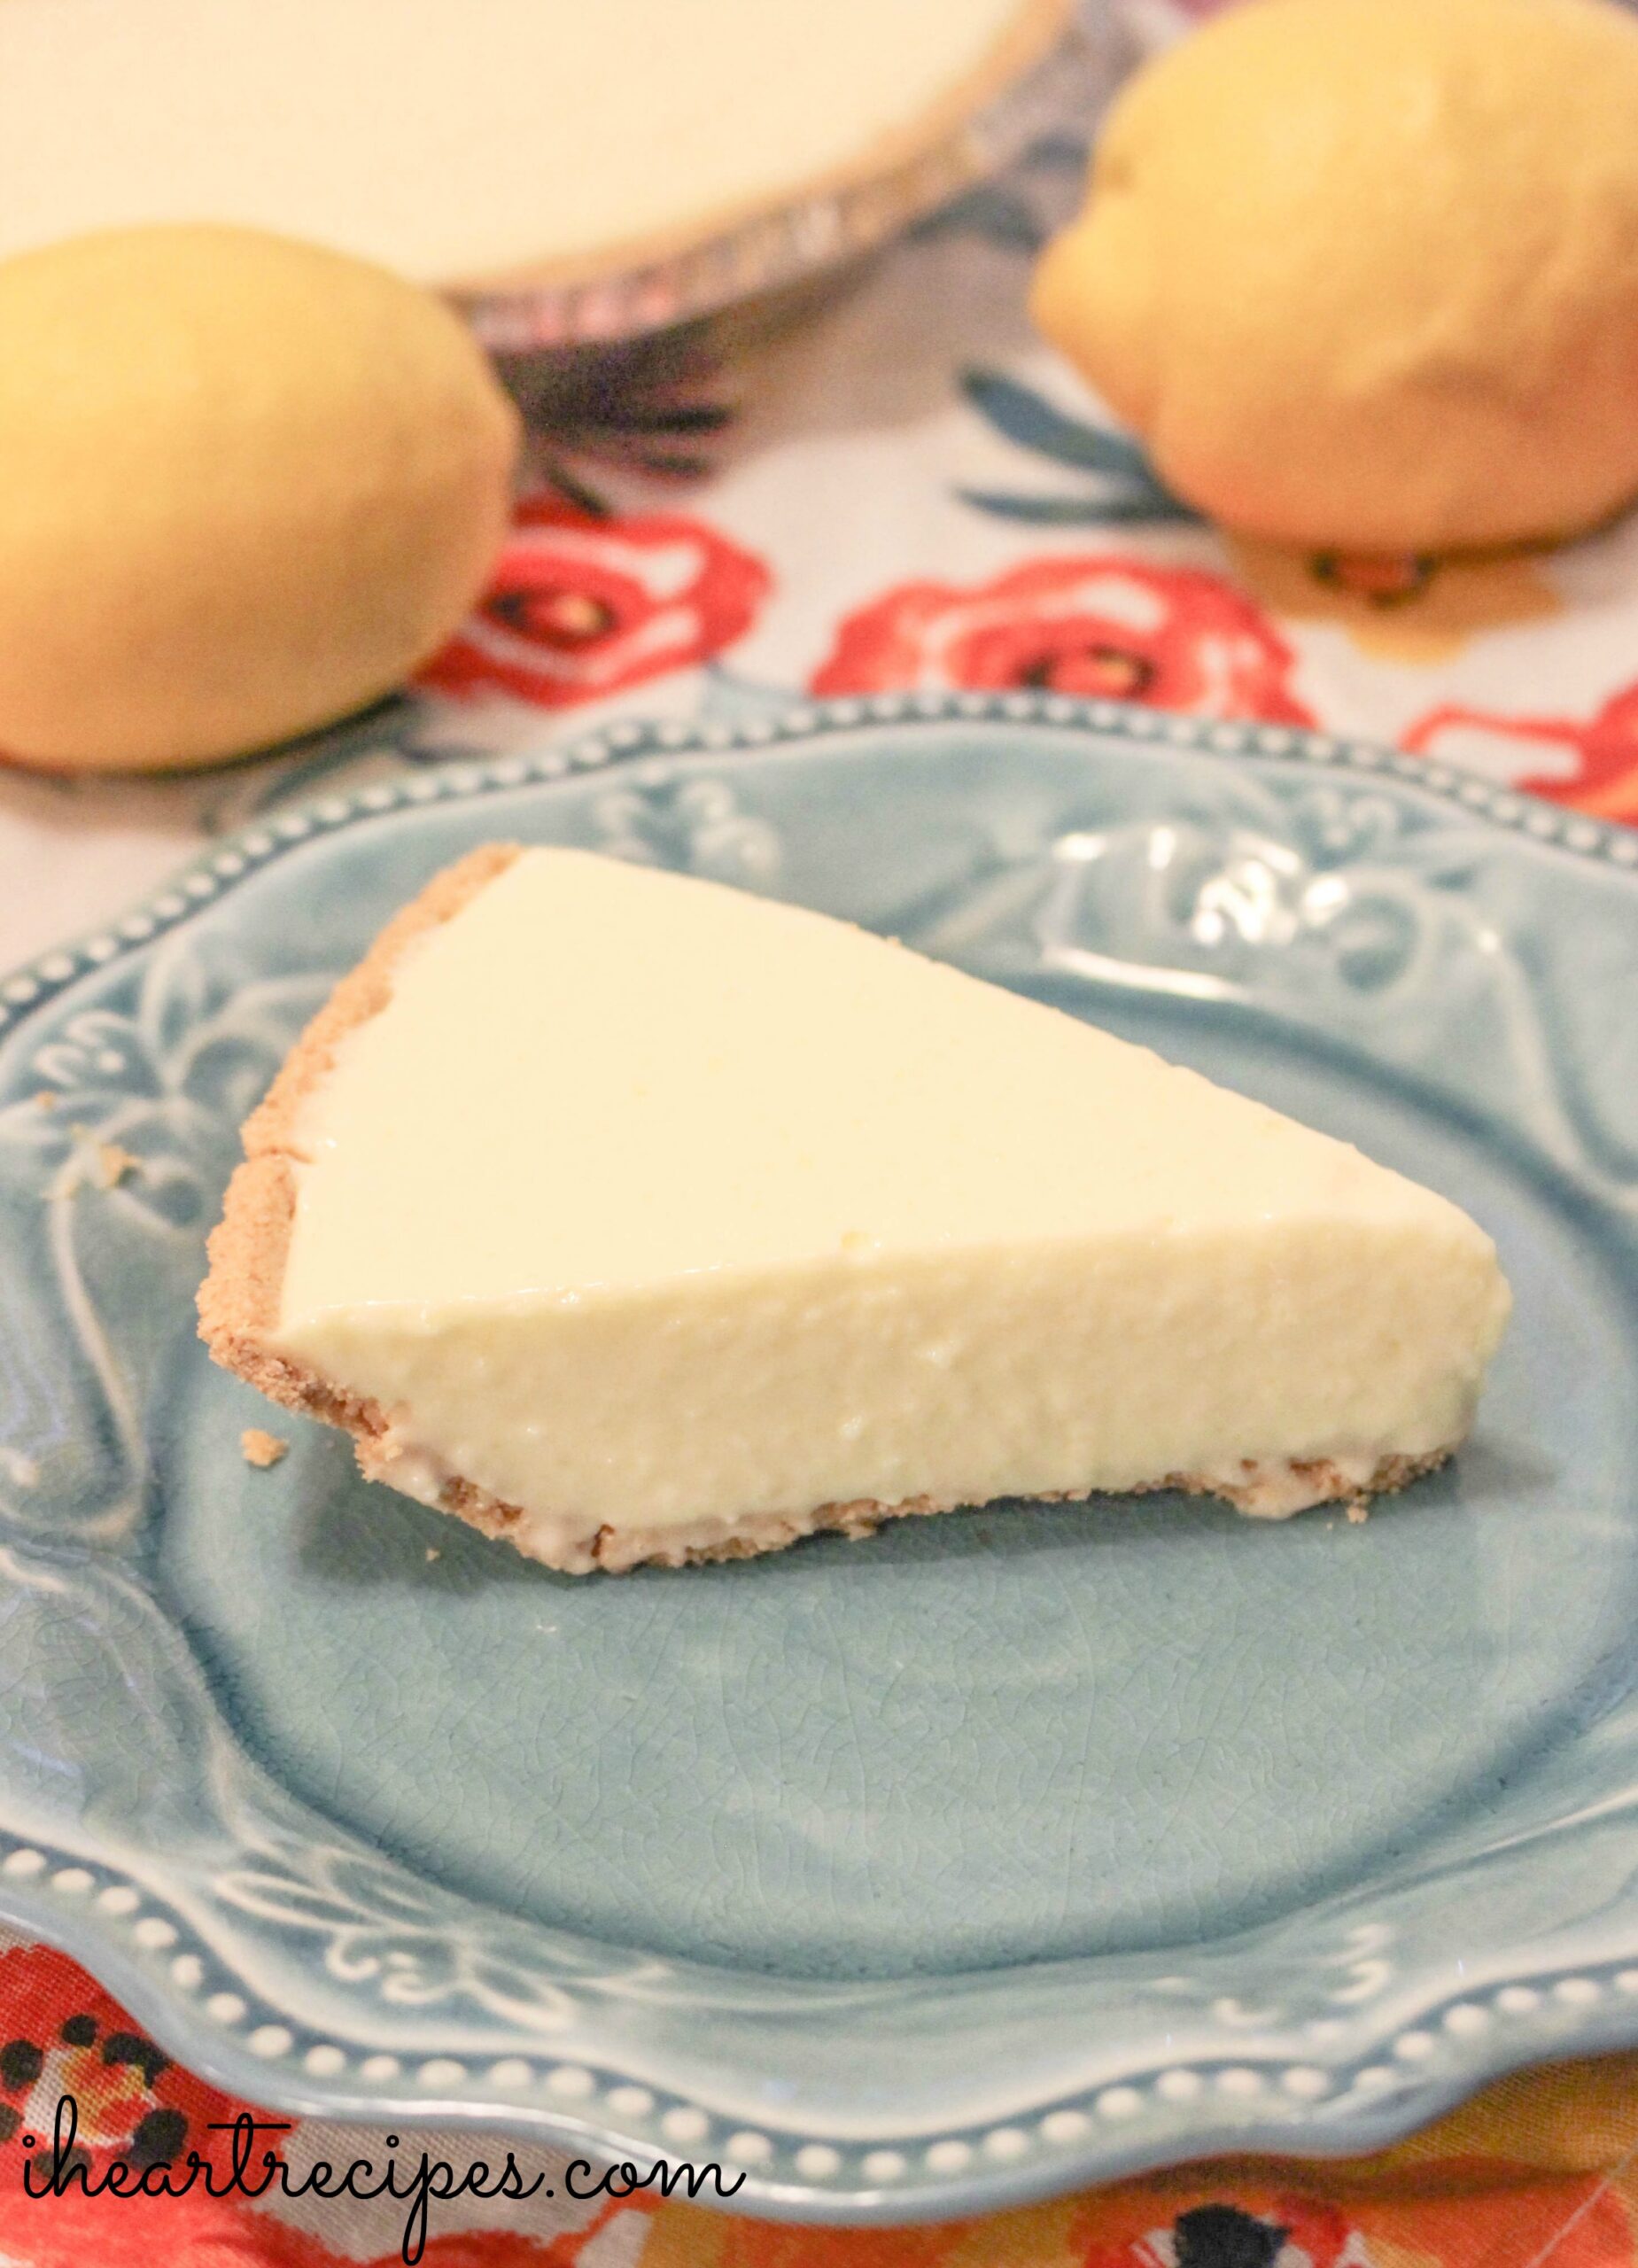 A single slice of no-bake lemon cheesecake served on a light blue ceramic dessert plate. In the background are two fresh lemons and the whole pan of lemon cheesecake served on the table.